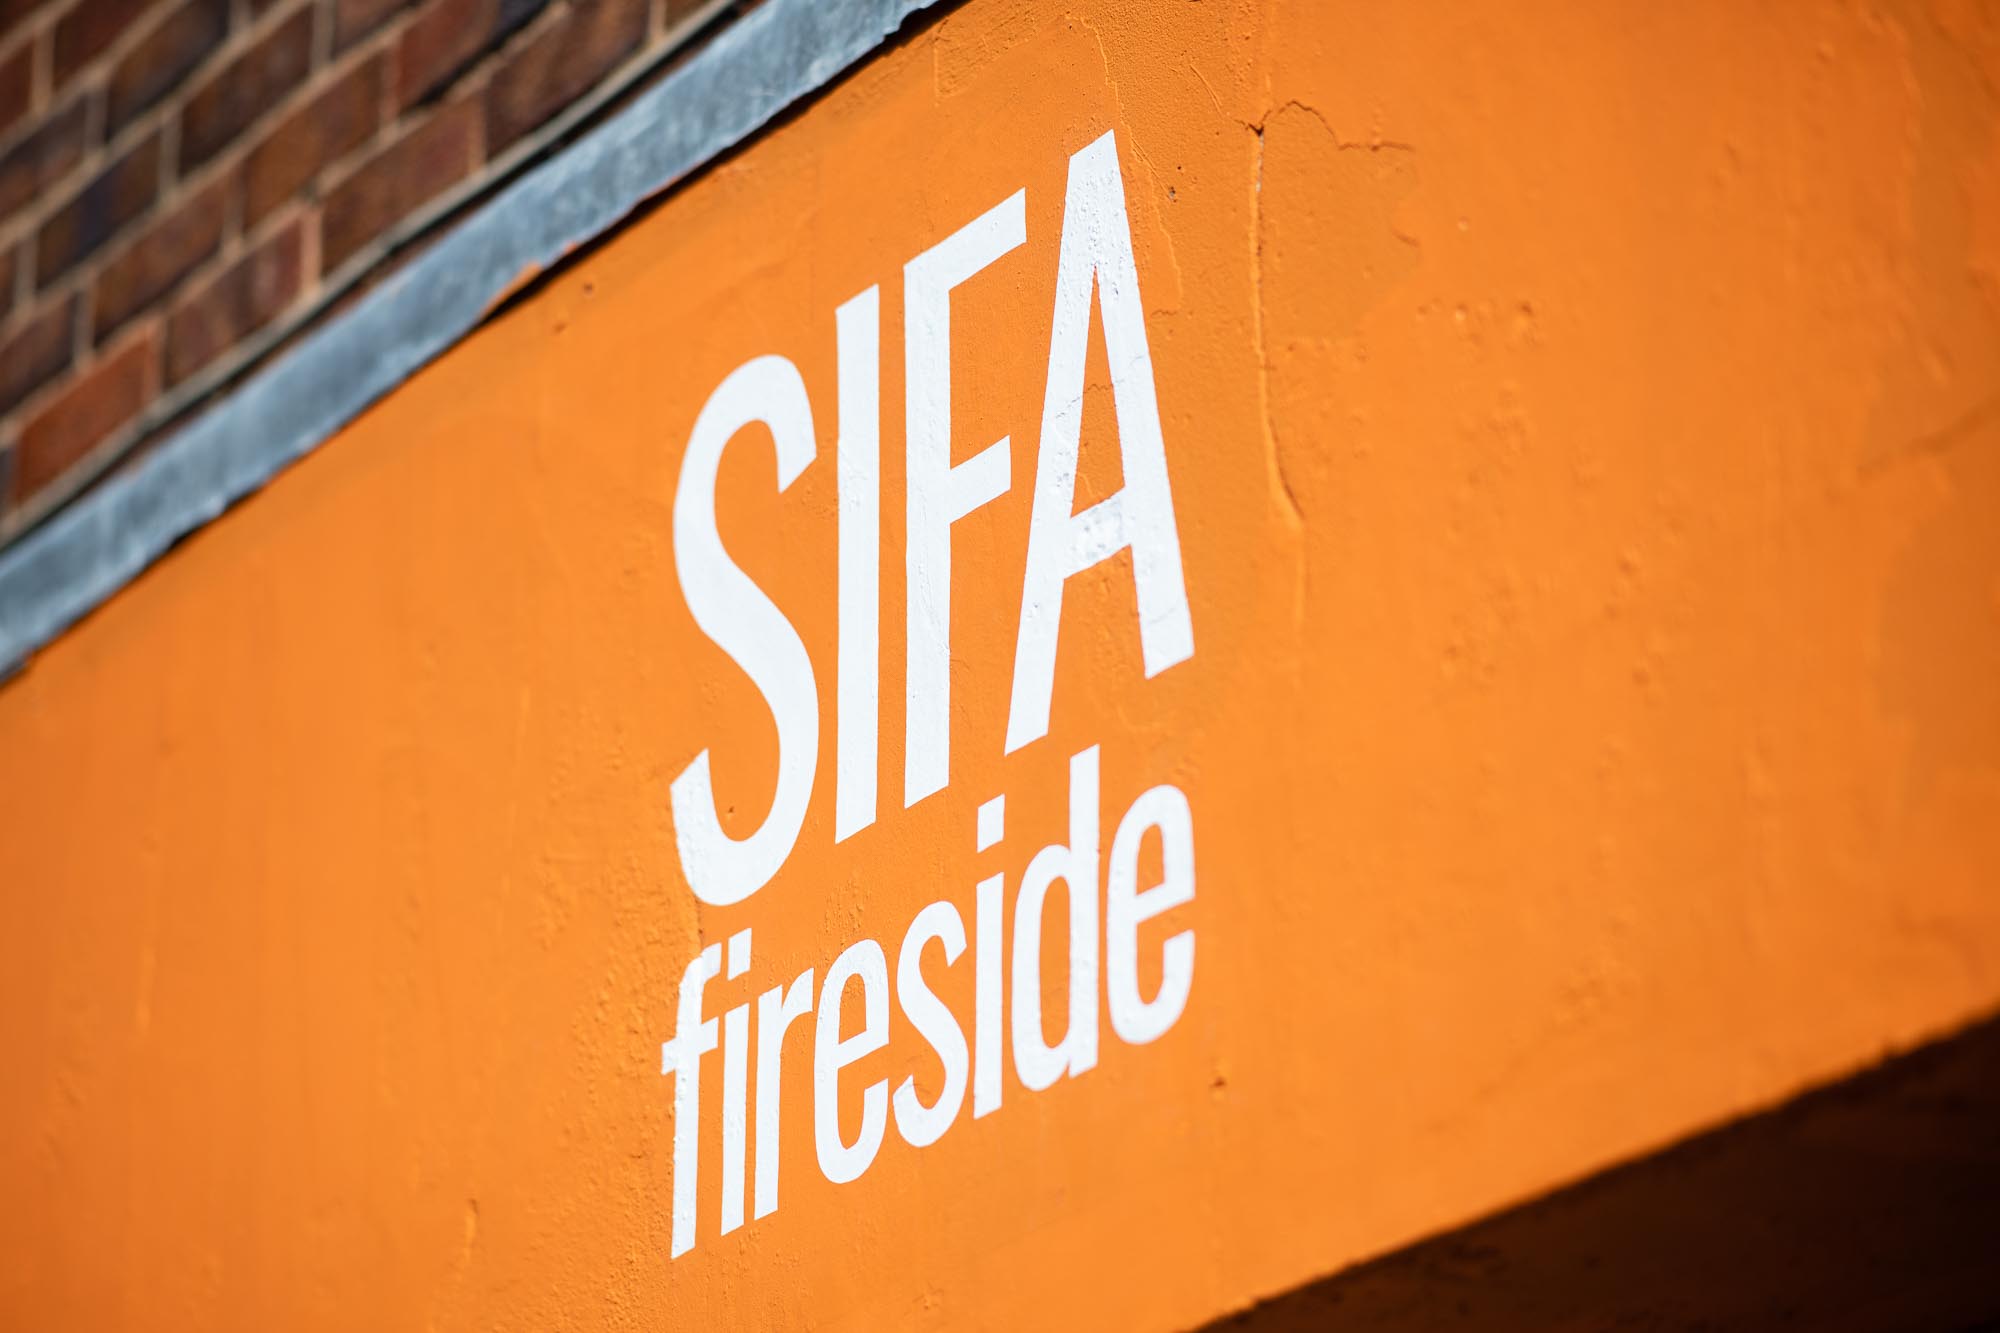 SIFA Fireside responds to the home secretary’s claims of homelessness being a “lifestyle choice”